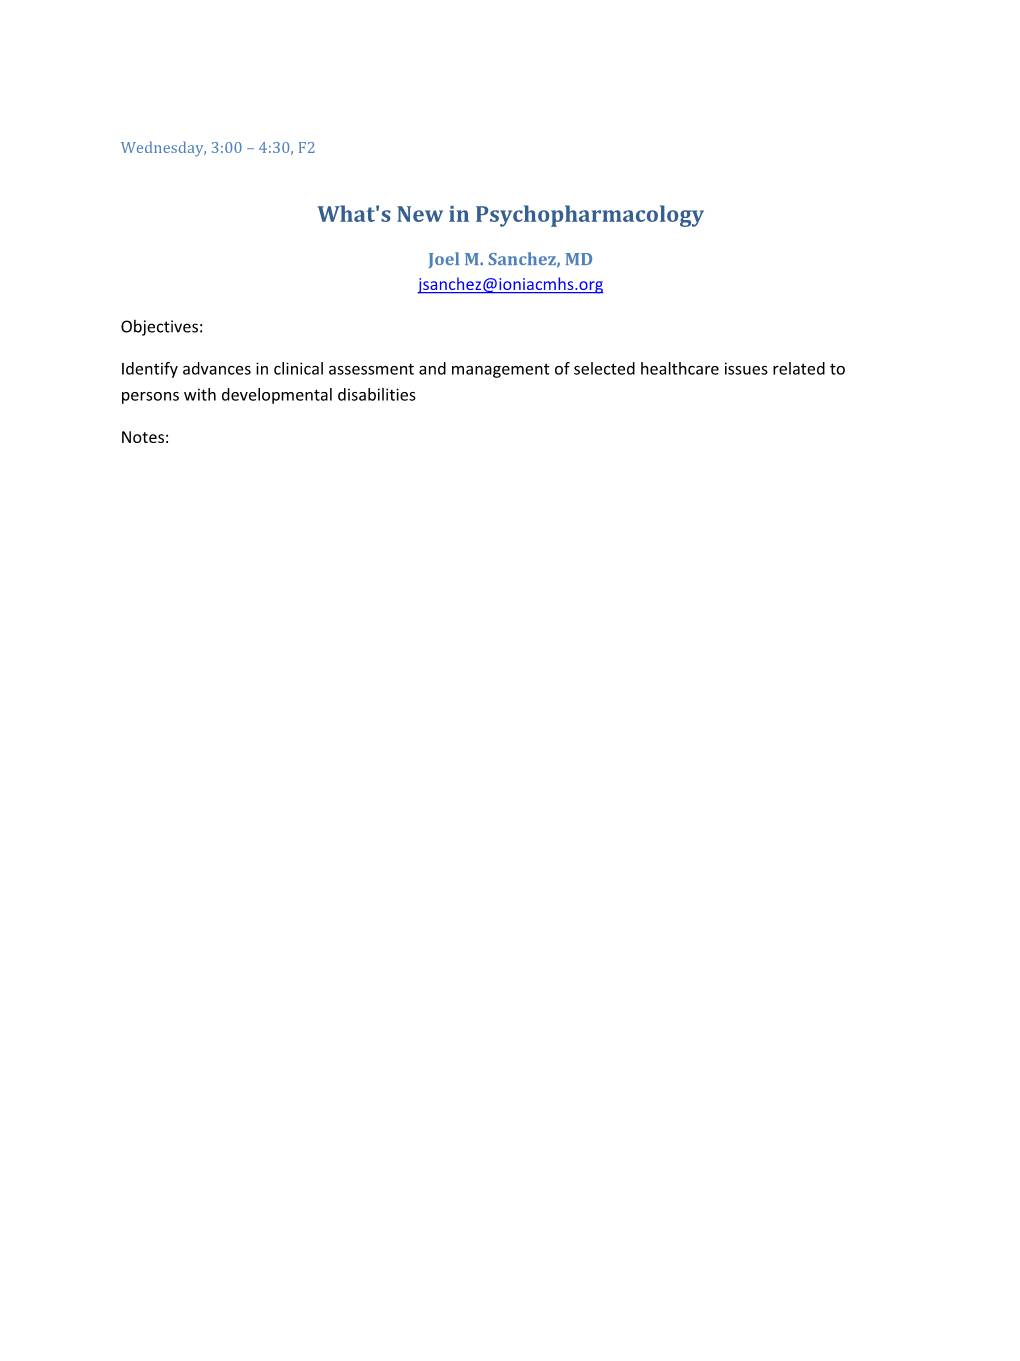 What's New in Psychopharmacology